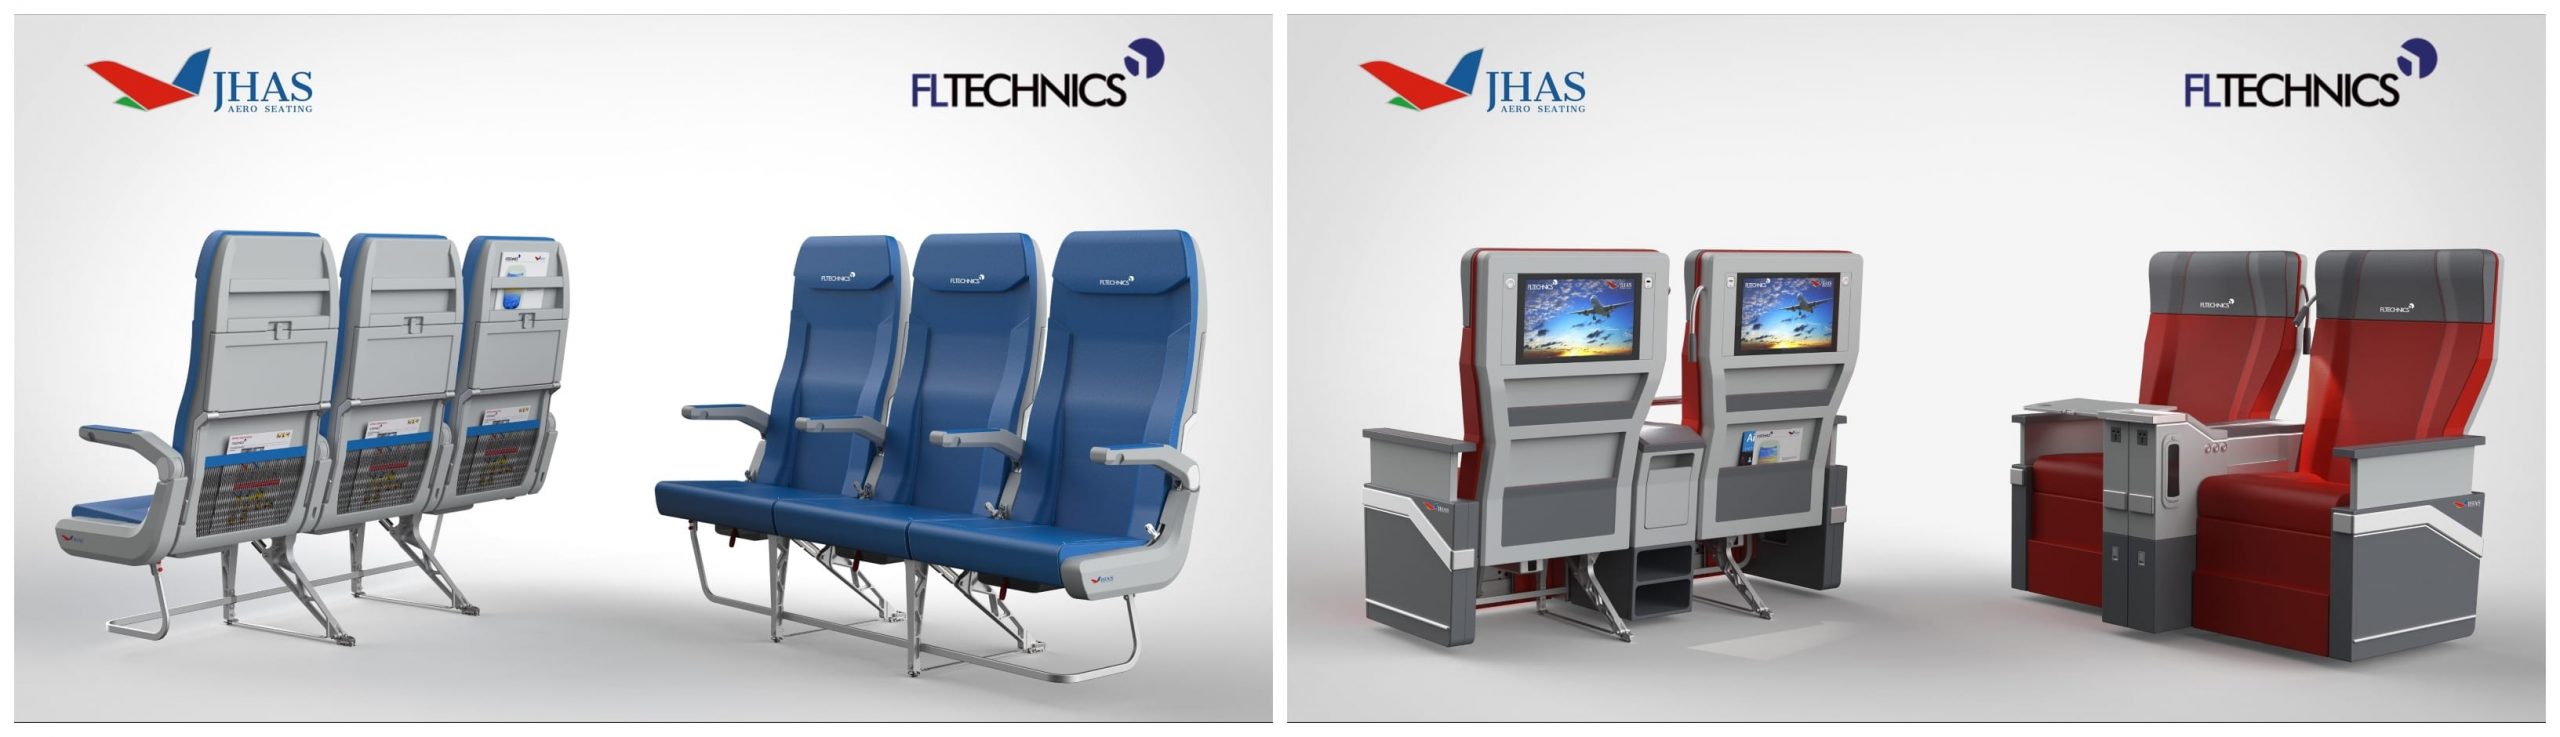 The breakthrough out of standardized economy, business and first class seating environment: exclusive rights for 3 continents